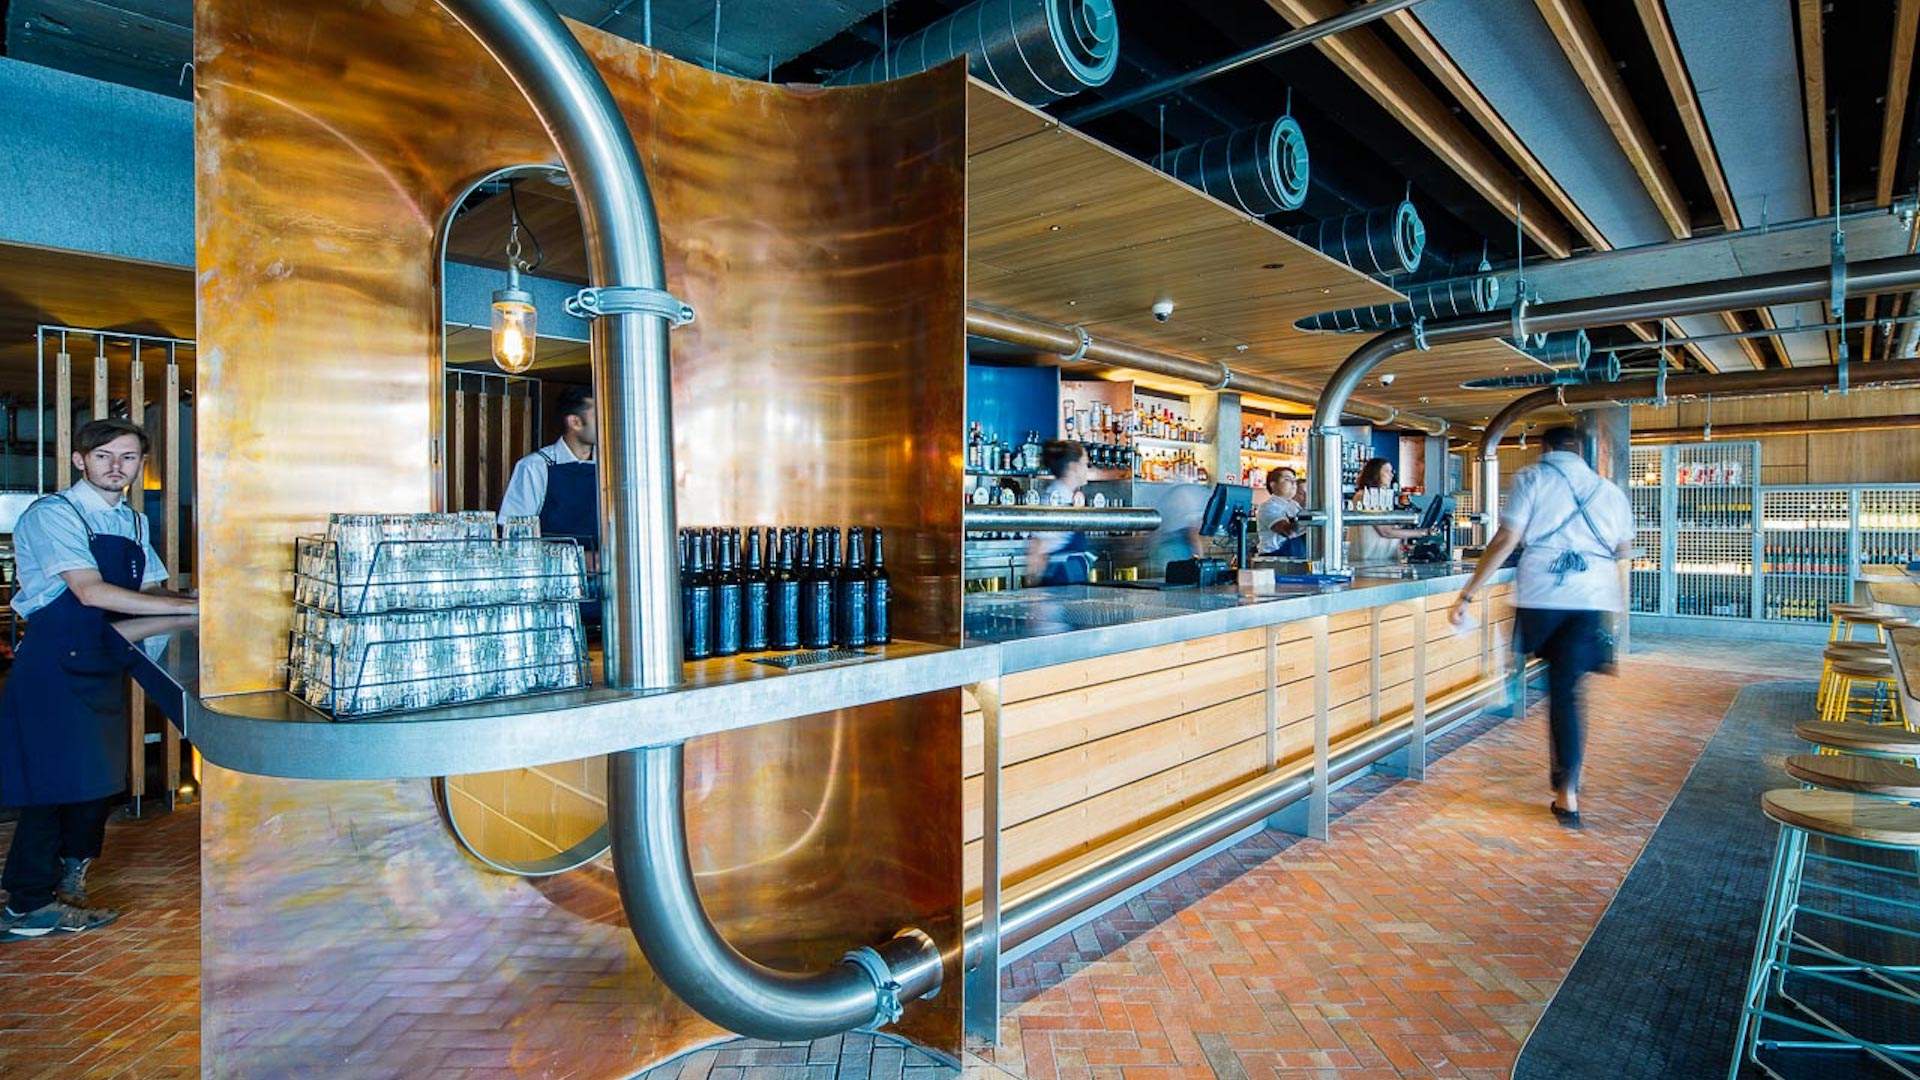 Sydney Just Scored Itself a New Pub with an On-Site Microbrewery